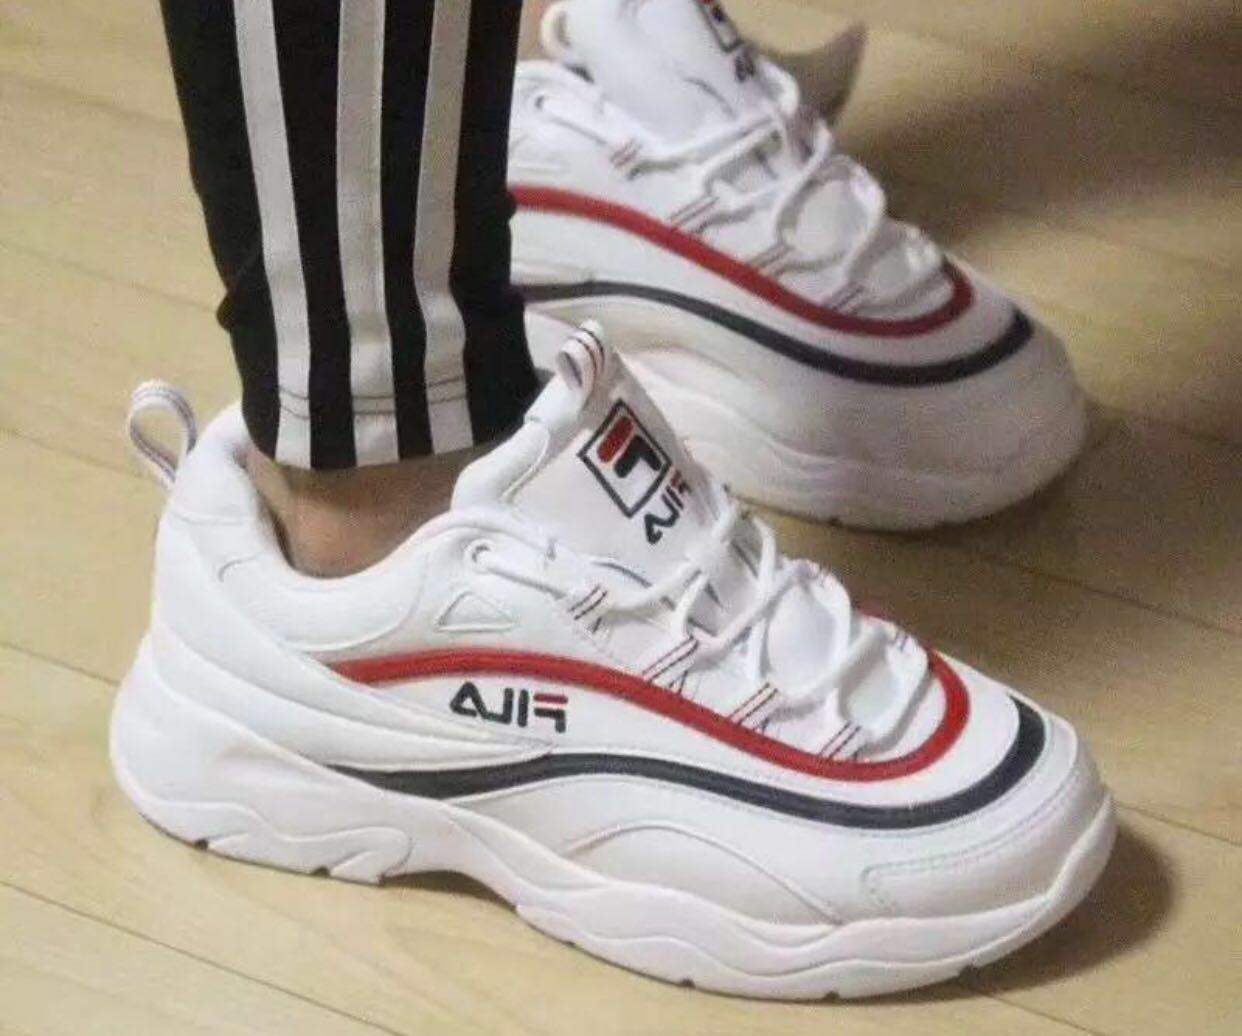 fila shoes red and blue